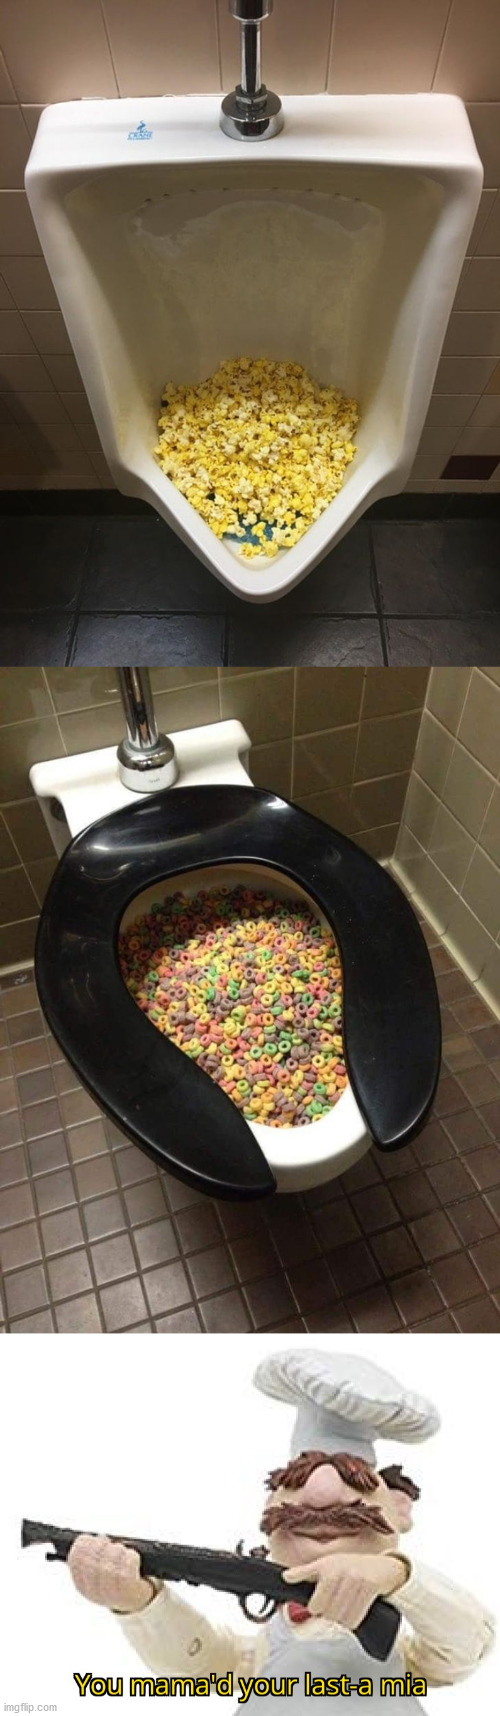 this is so cursed | image tagged in you mama'd your last-a mia,popcorn,cereal,toilet,urinal,cursed image | made w/ Imgflip meme maker